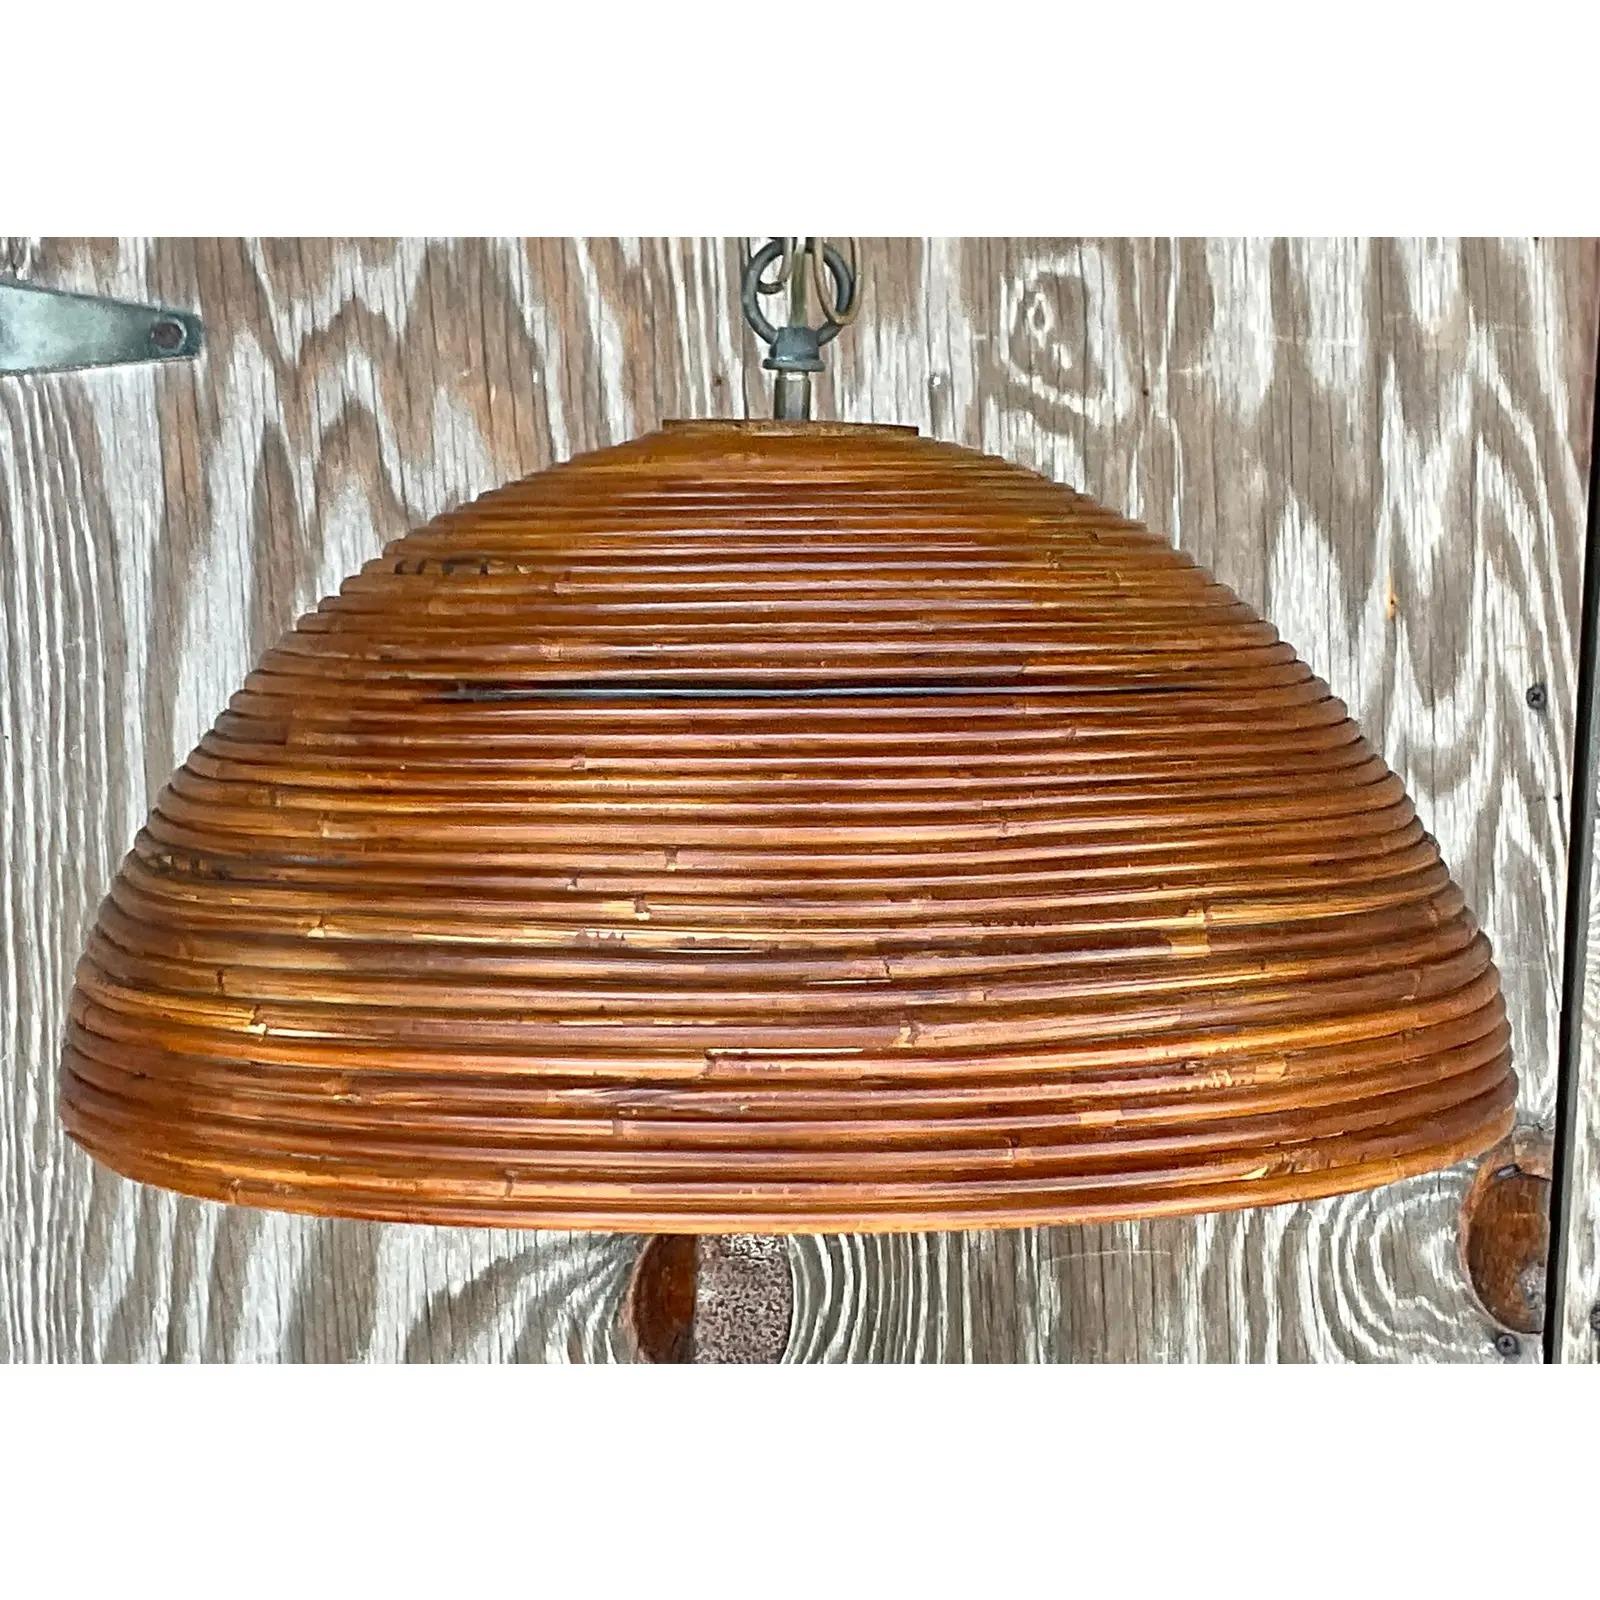 A fabulous vintage Costal chandelier. A beautiful pencil reed dome with beautiful warm patin from time. Acquired from a Palm Beach estate.